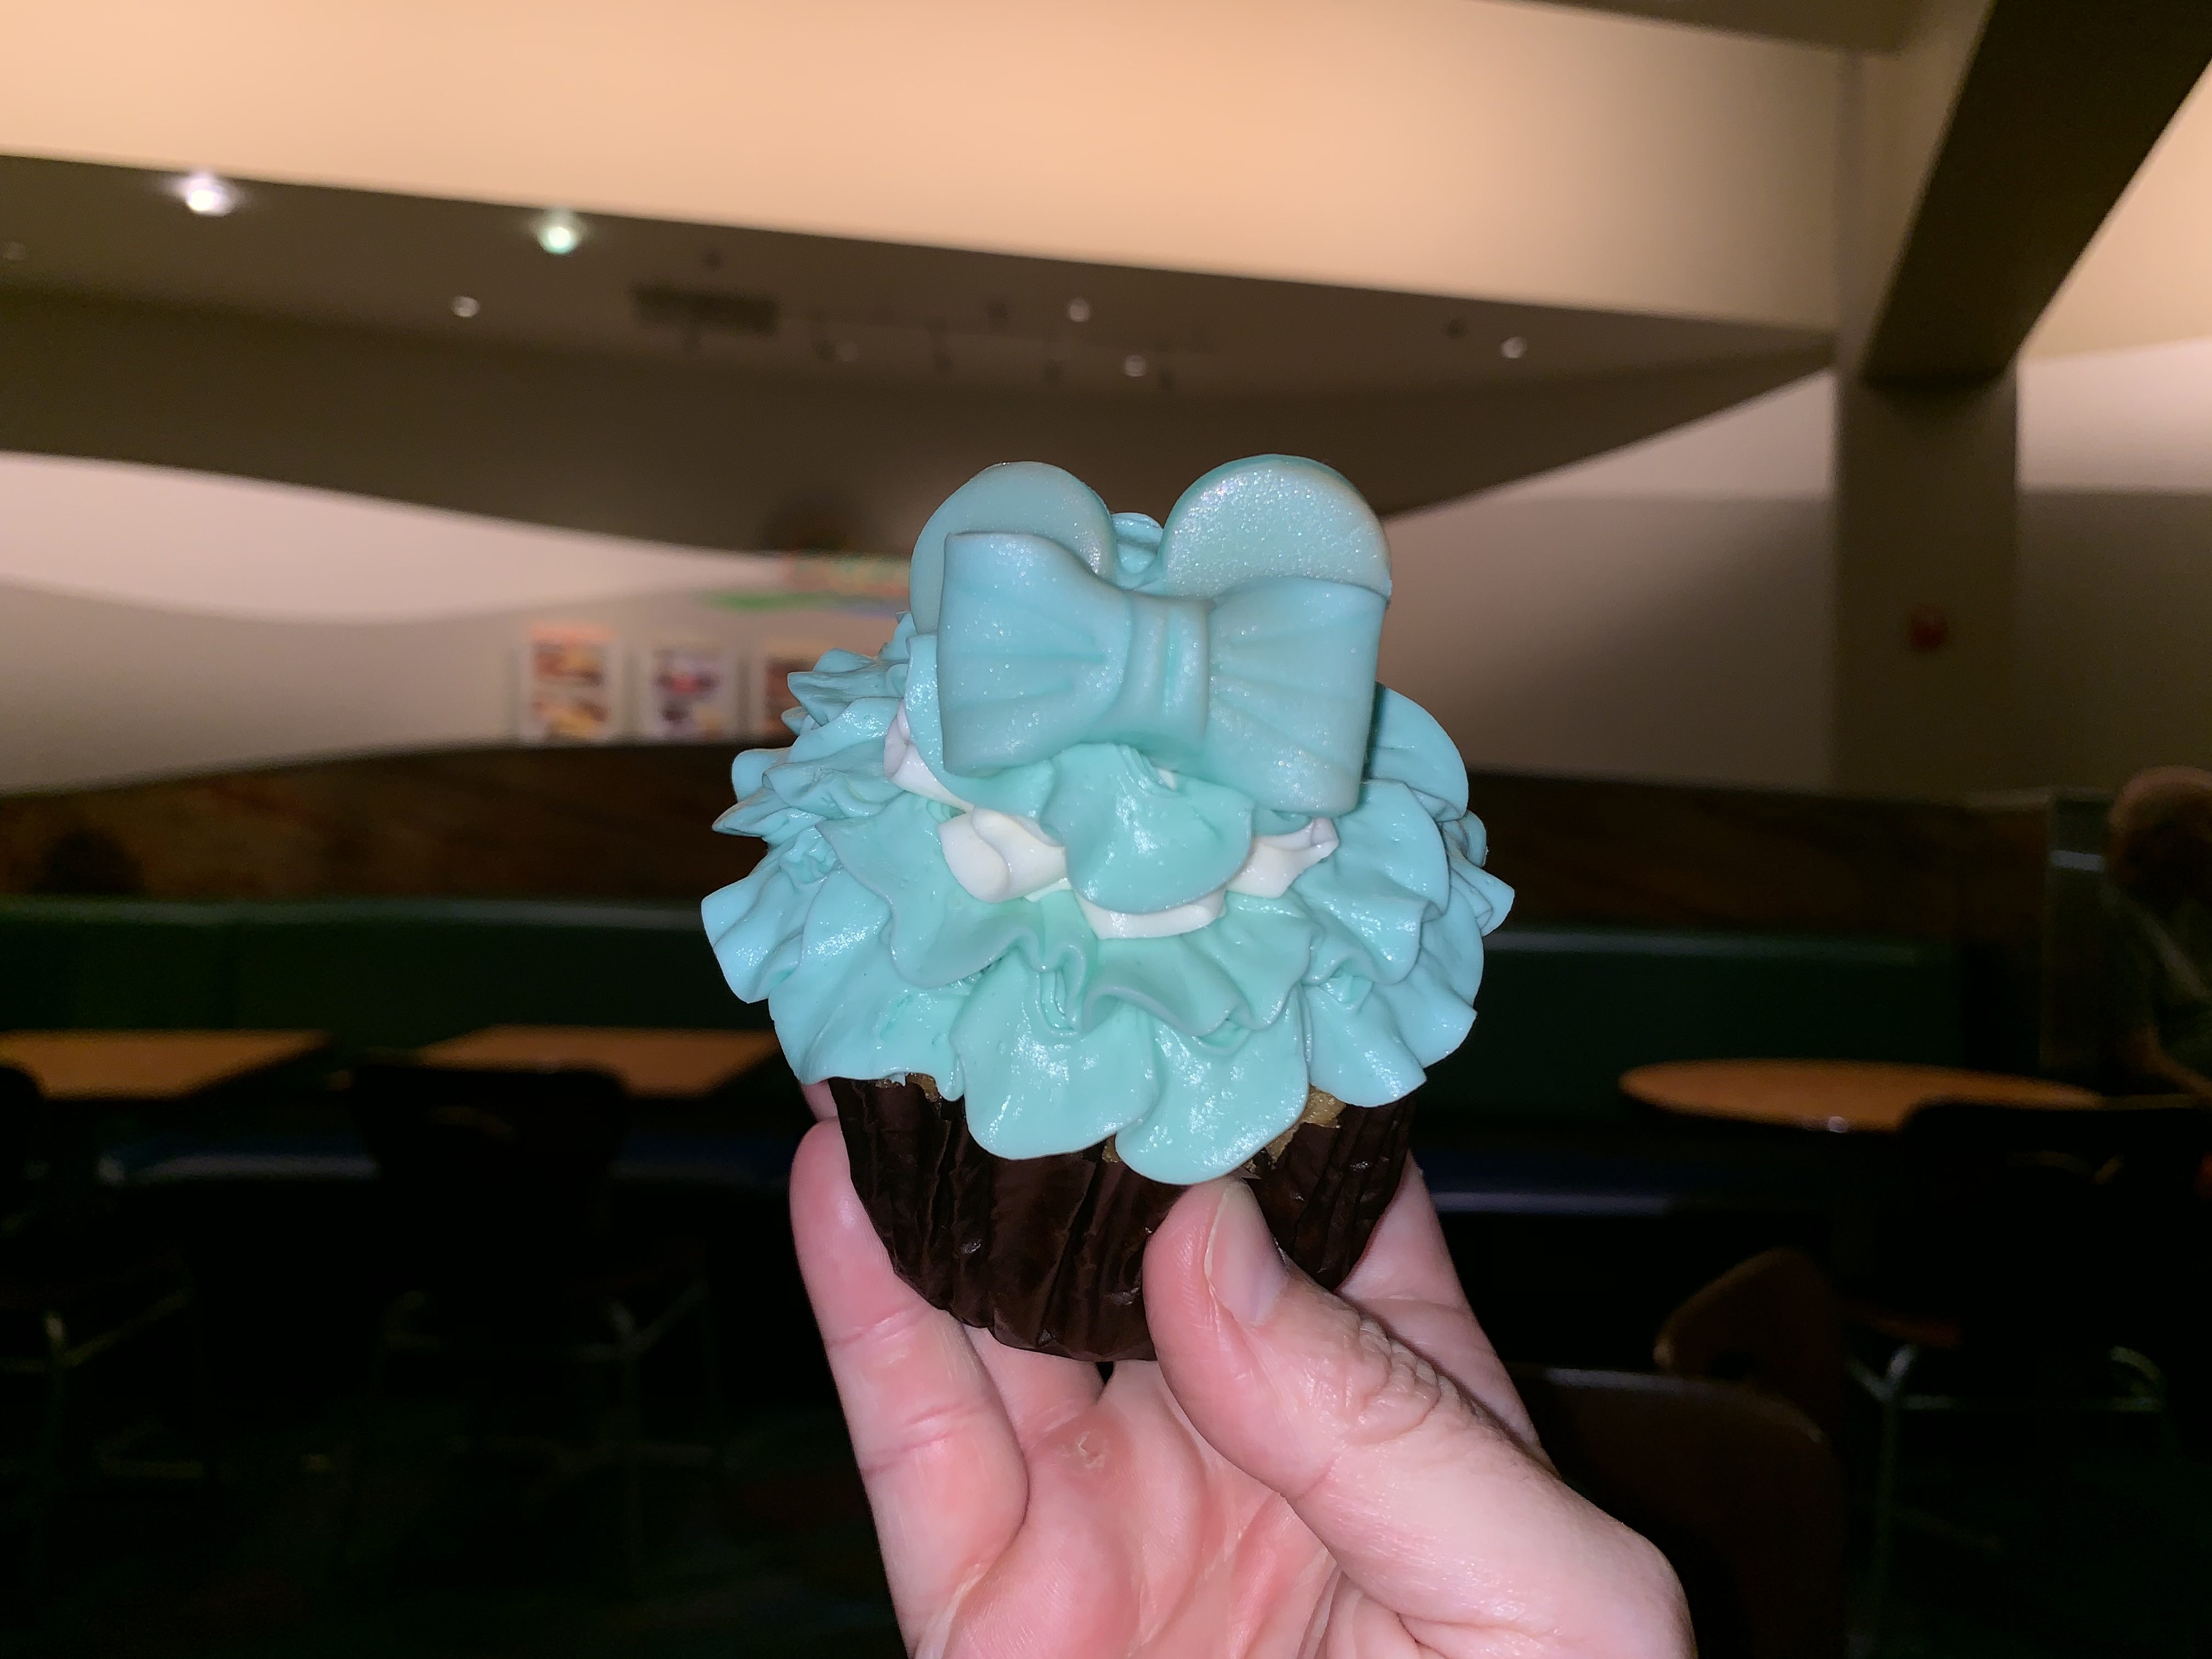 Arendelle Aqua Pearl Cupcake Has You ‘Falling in Love At First Sight’